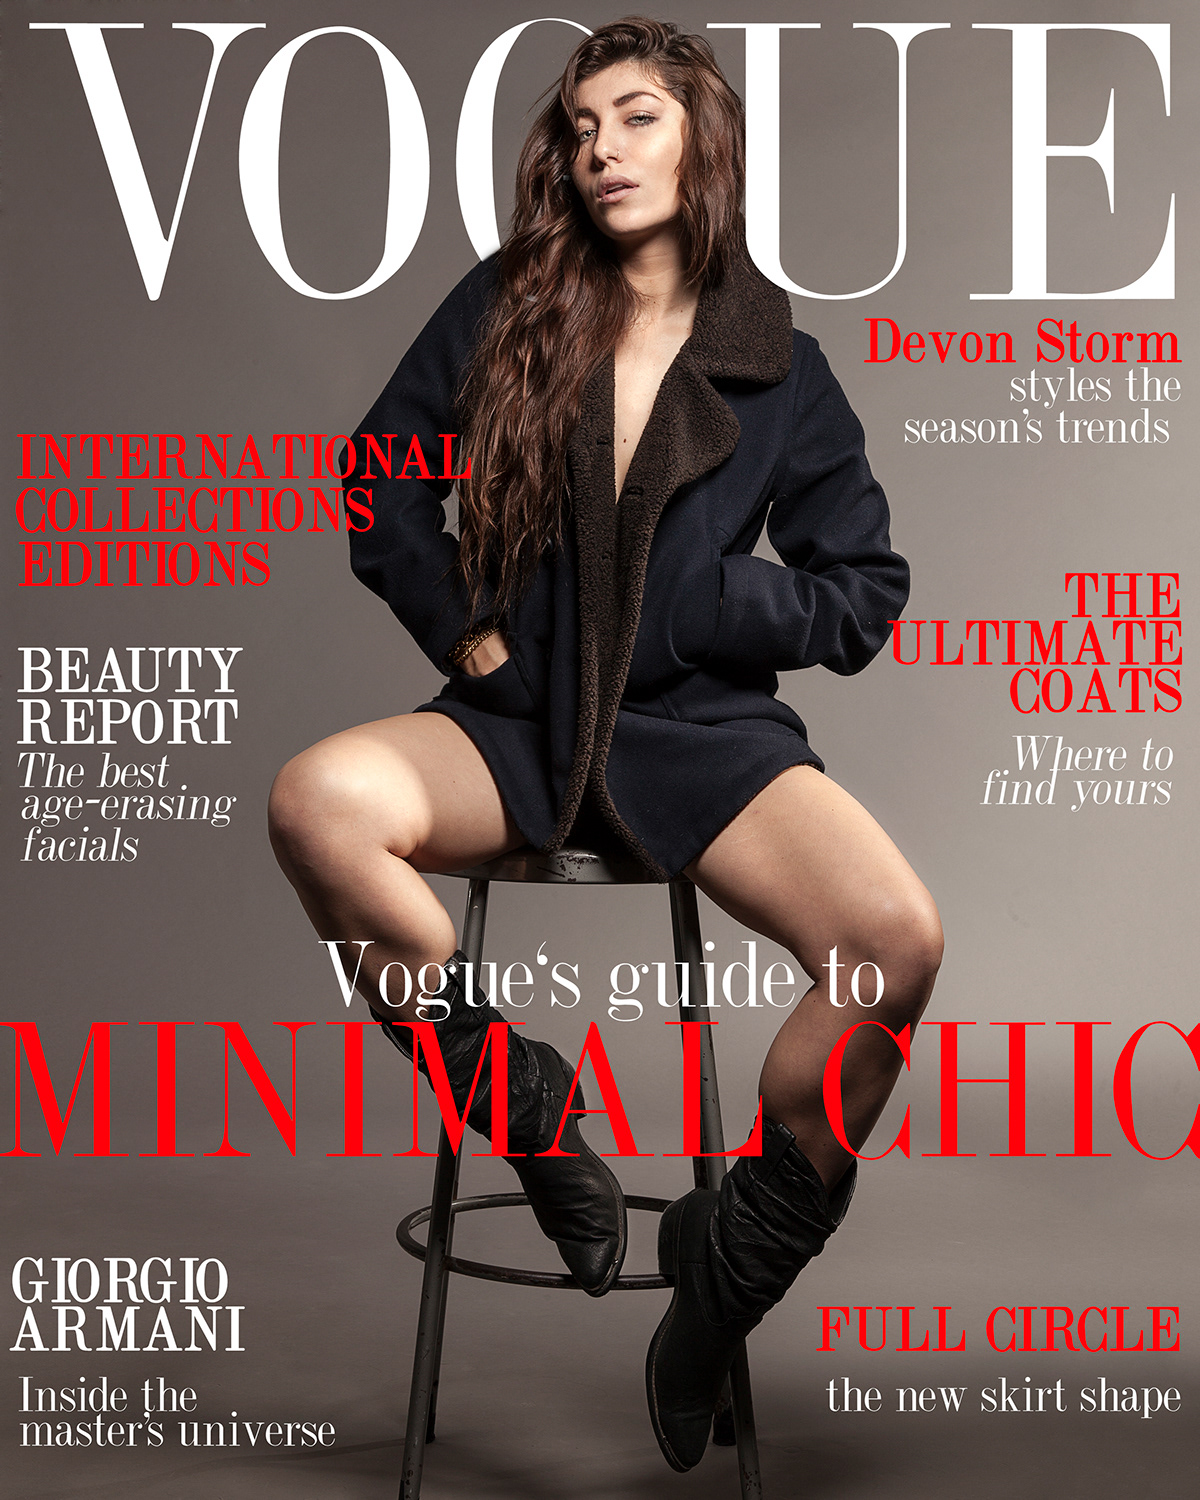 Vogue covers Magazine Covers vogue recreations